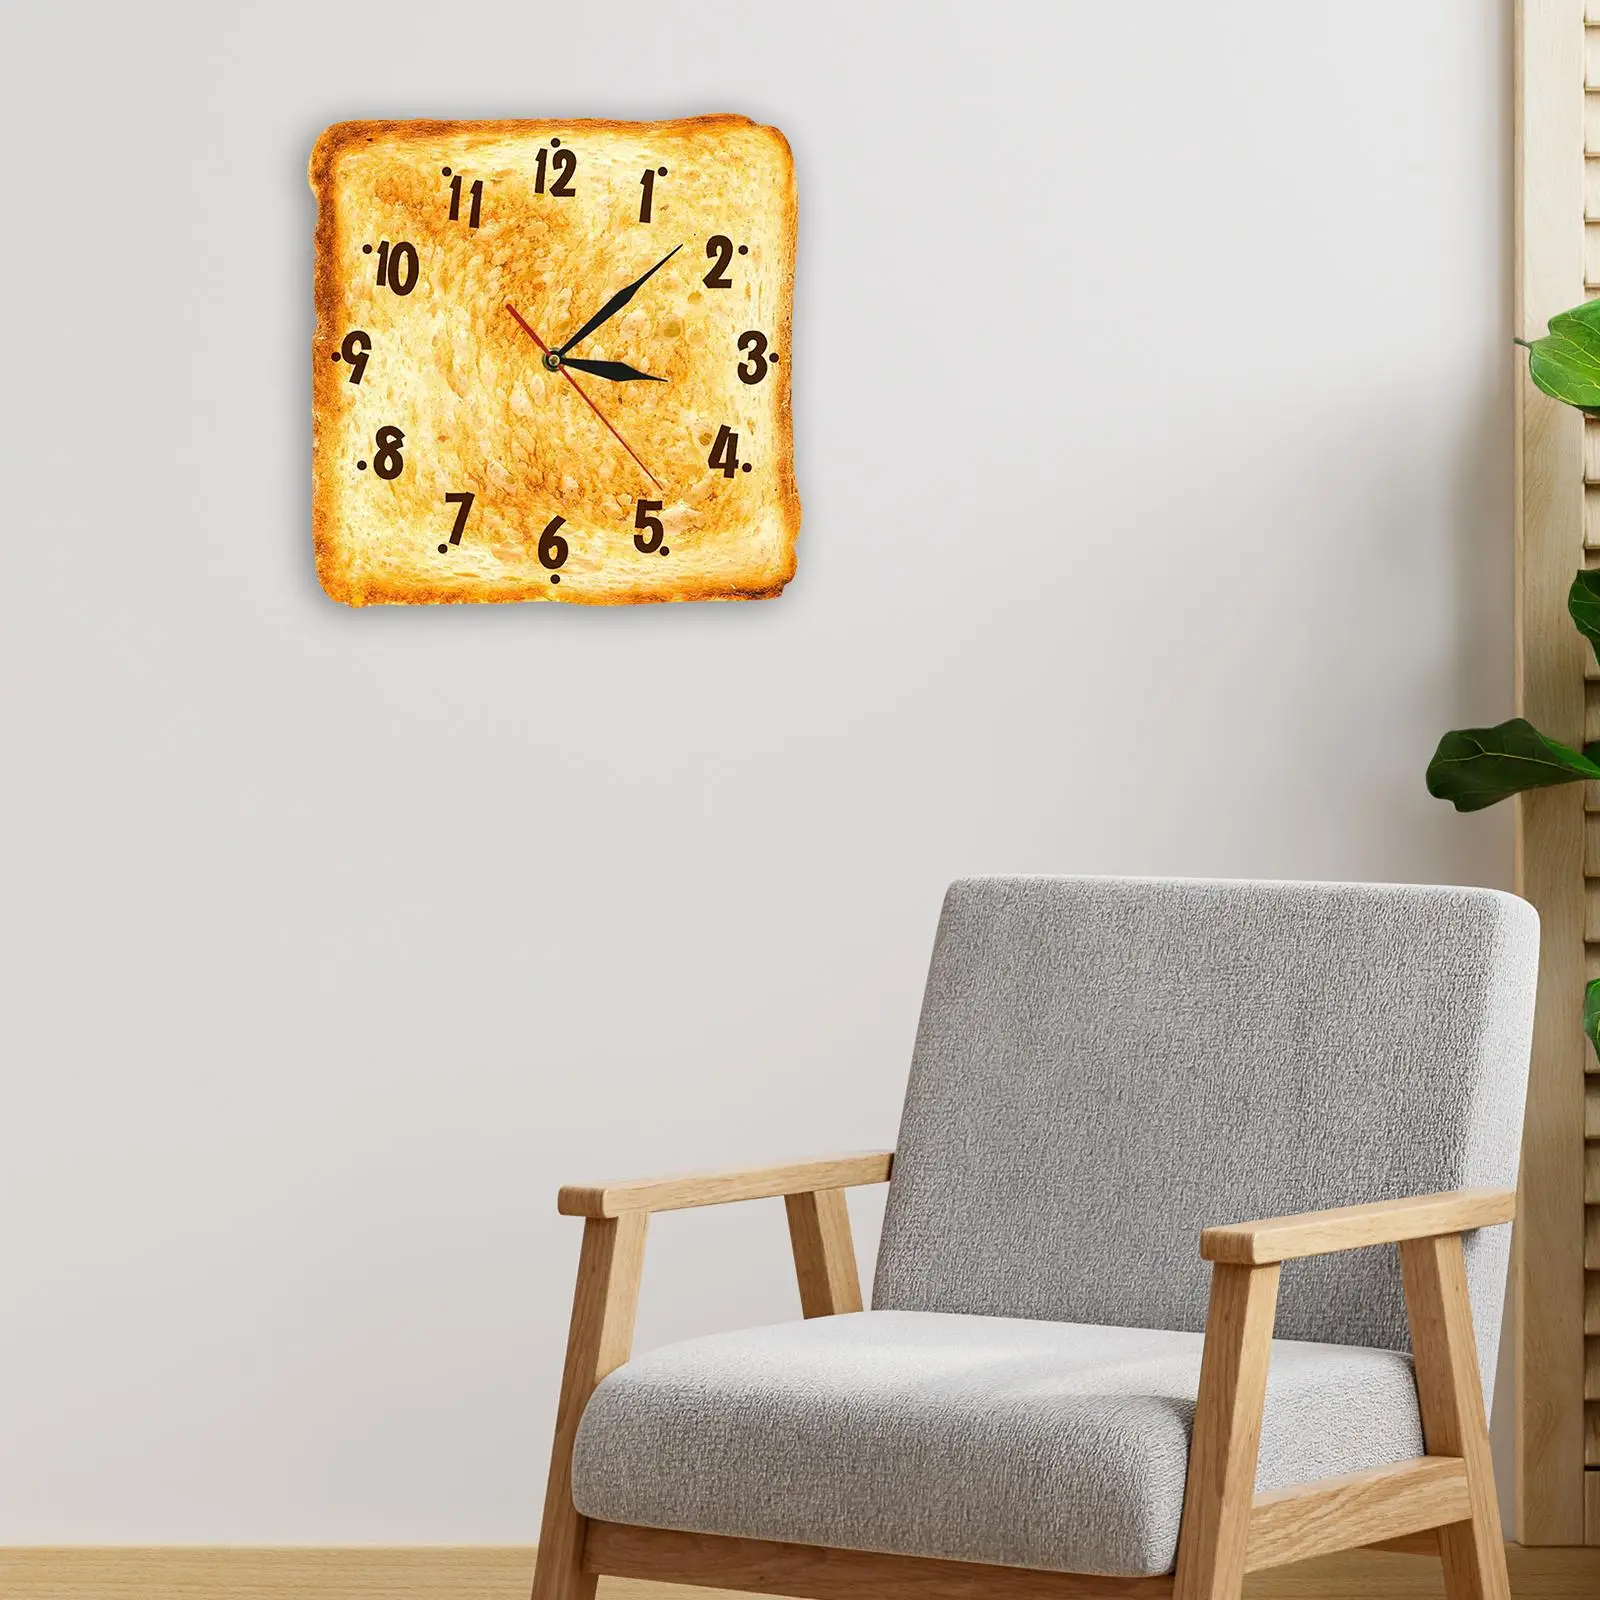 Toasted Bread Wall Clock, Decoration Silent Gourmet 30cm Home Decor Non Ticking Wall  Quartz Clock for  Room